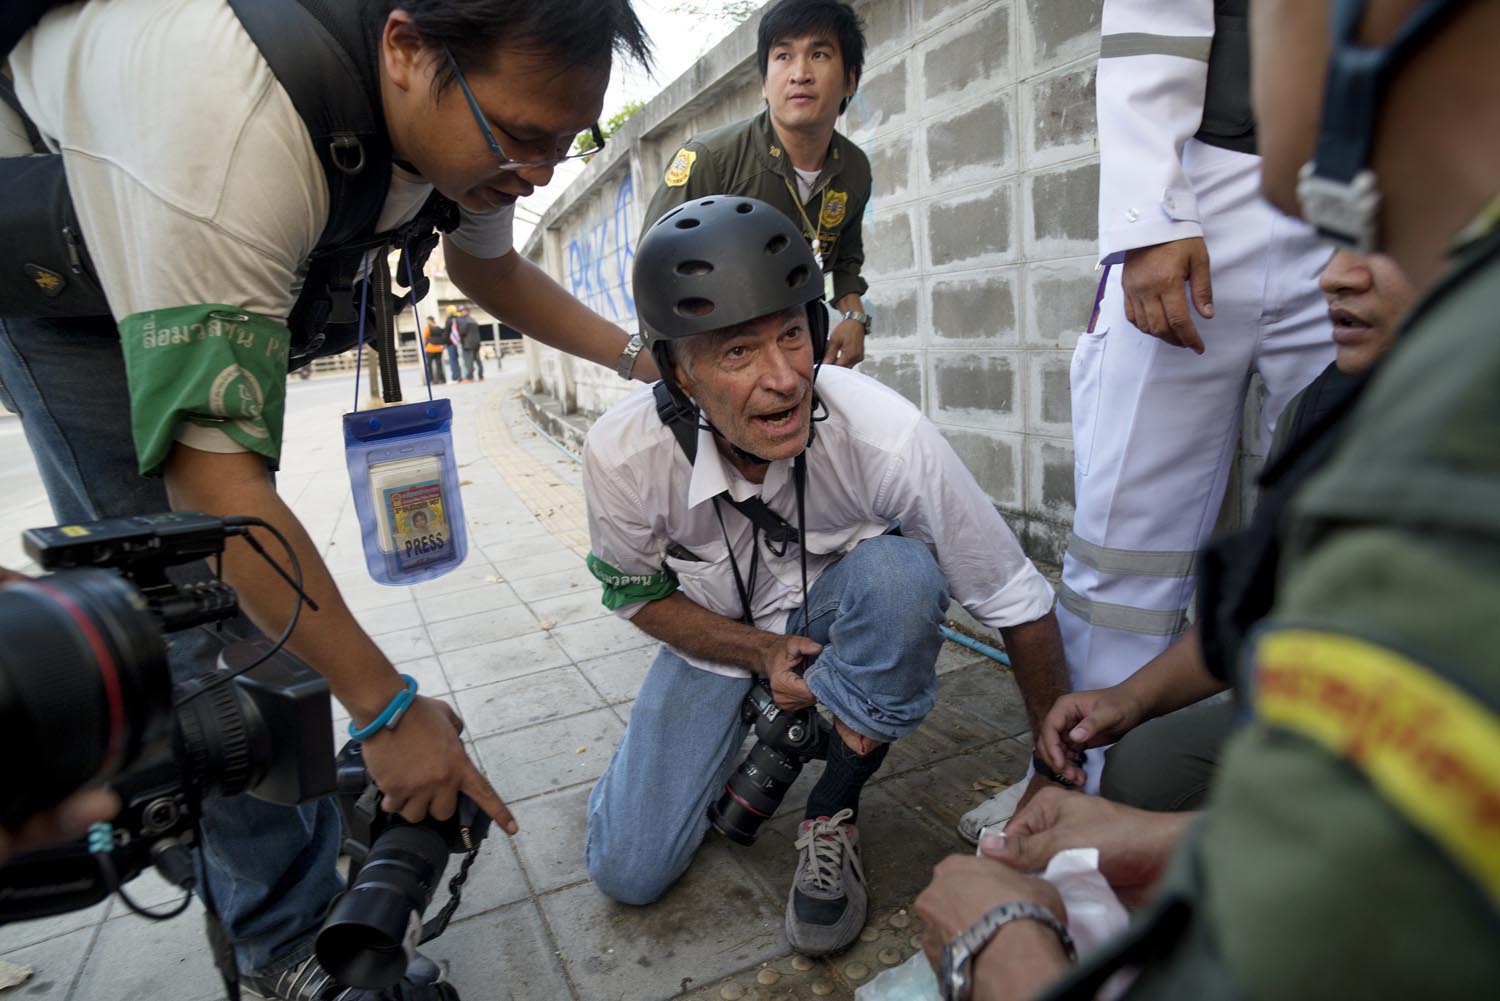 James Nachtwey, shortly after being wounded during protests in Thailand on Saturday (Jonas Gratzer)